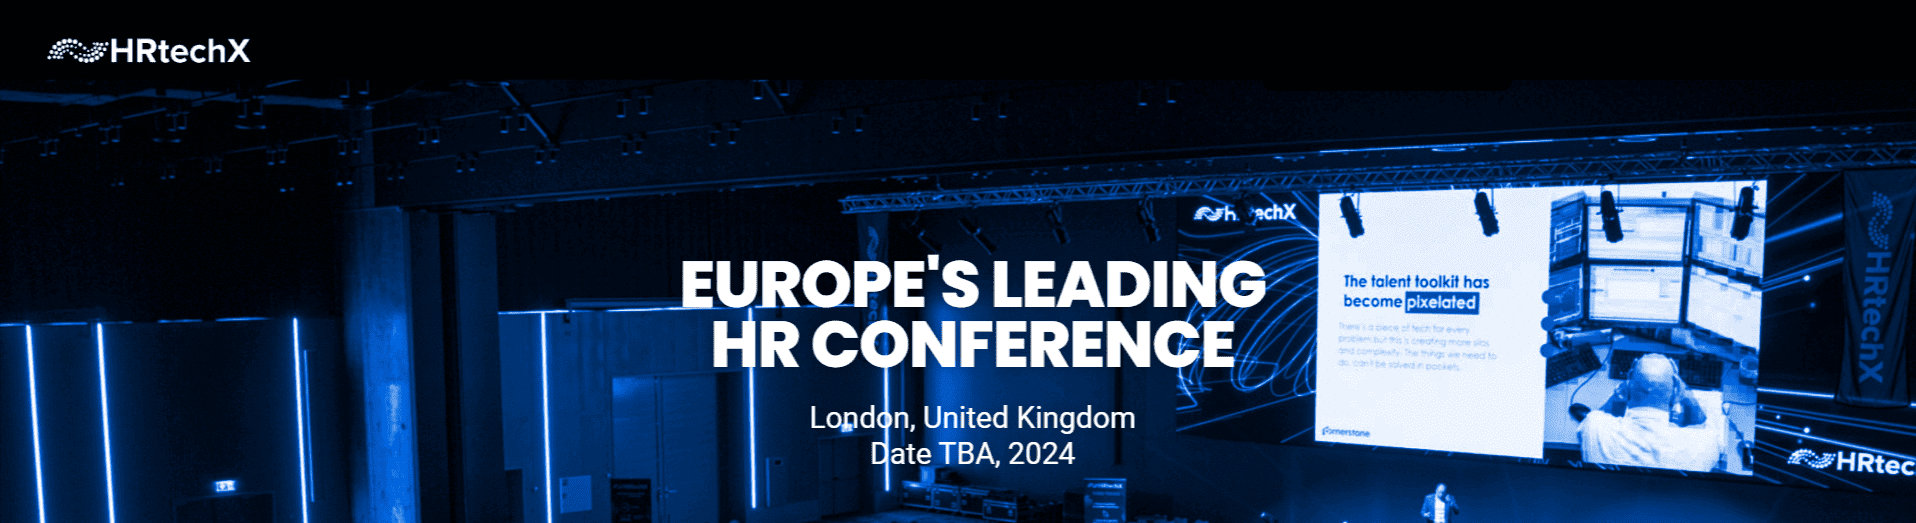 HRtechX-London-The-leading-HRtech-community-in-Europe (1).png